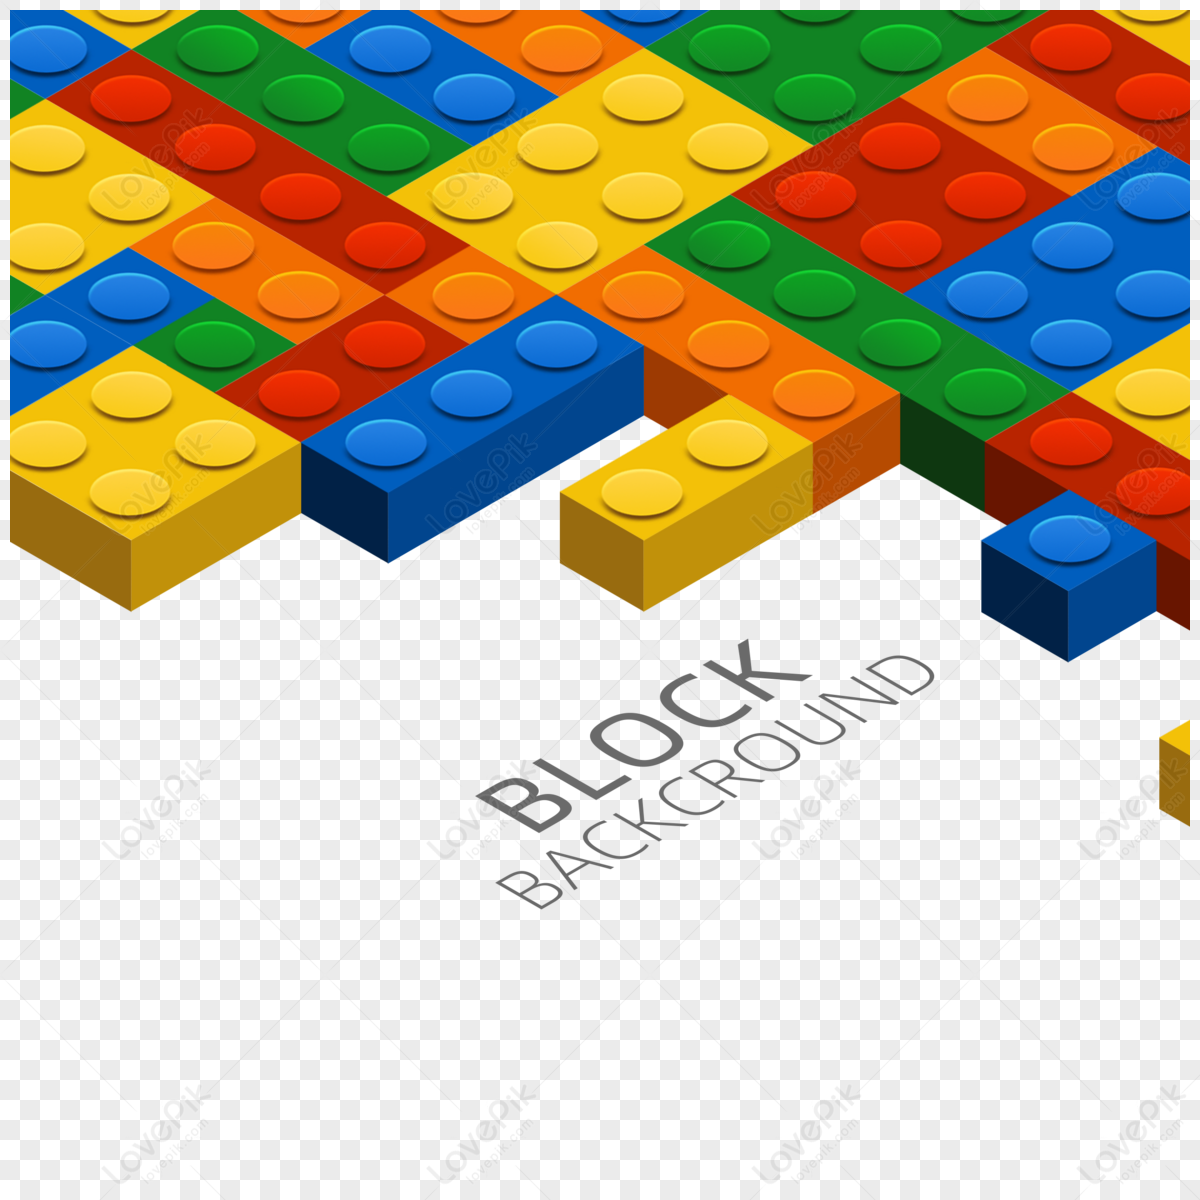 Best Free Red Lego Blocks Image PNG Transparent Background, Free Download  #46626 - FreeIconsPNG